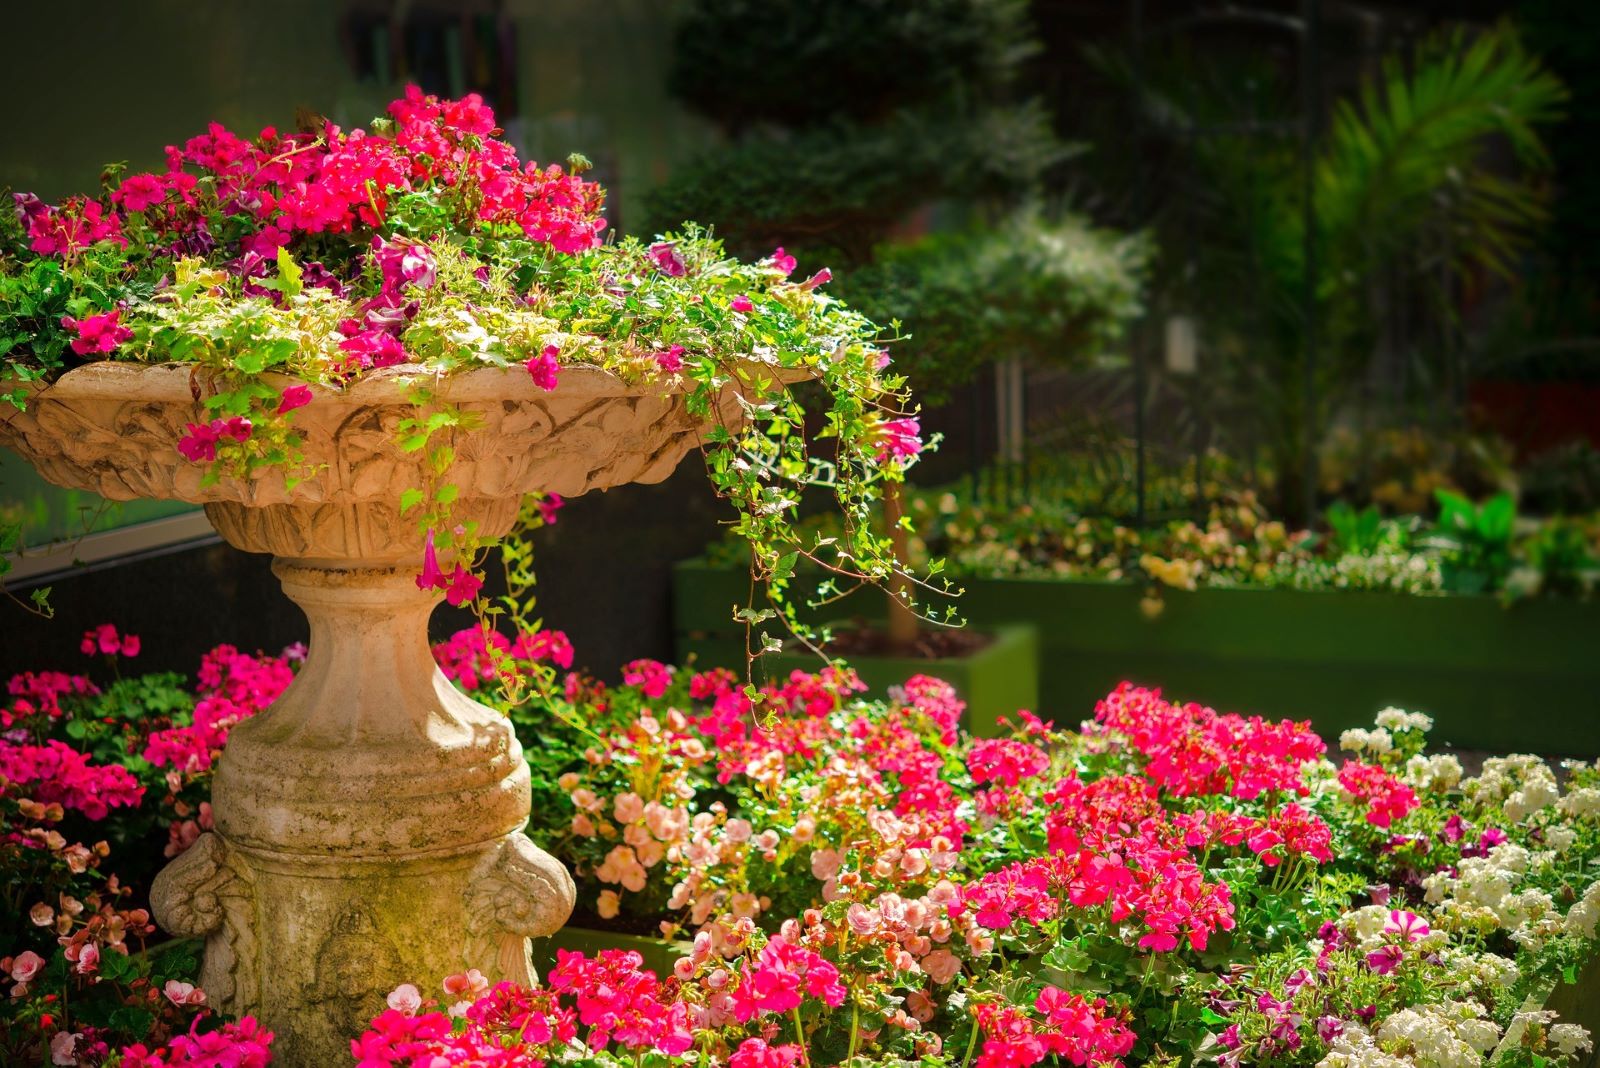 A fountain filled with flowers in an English country garden